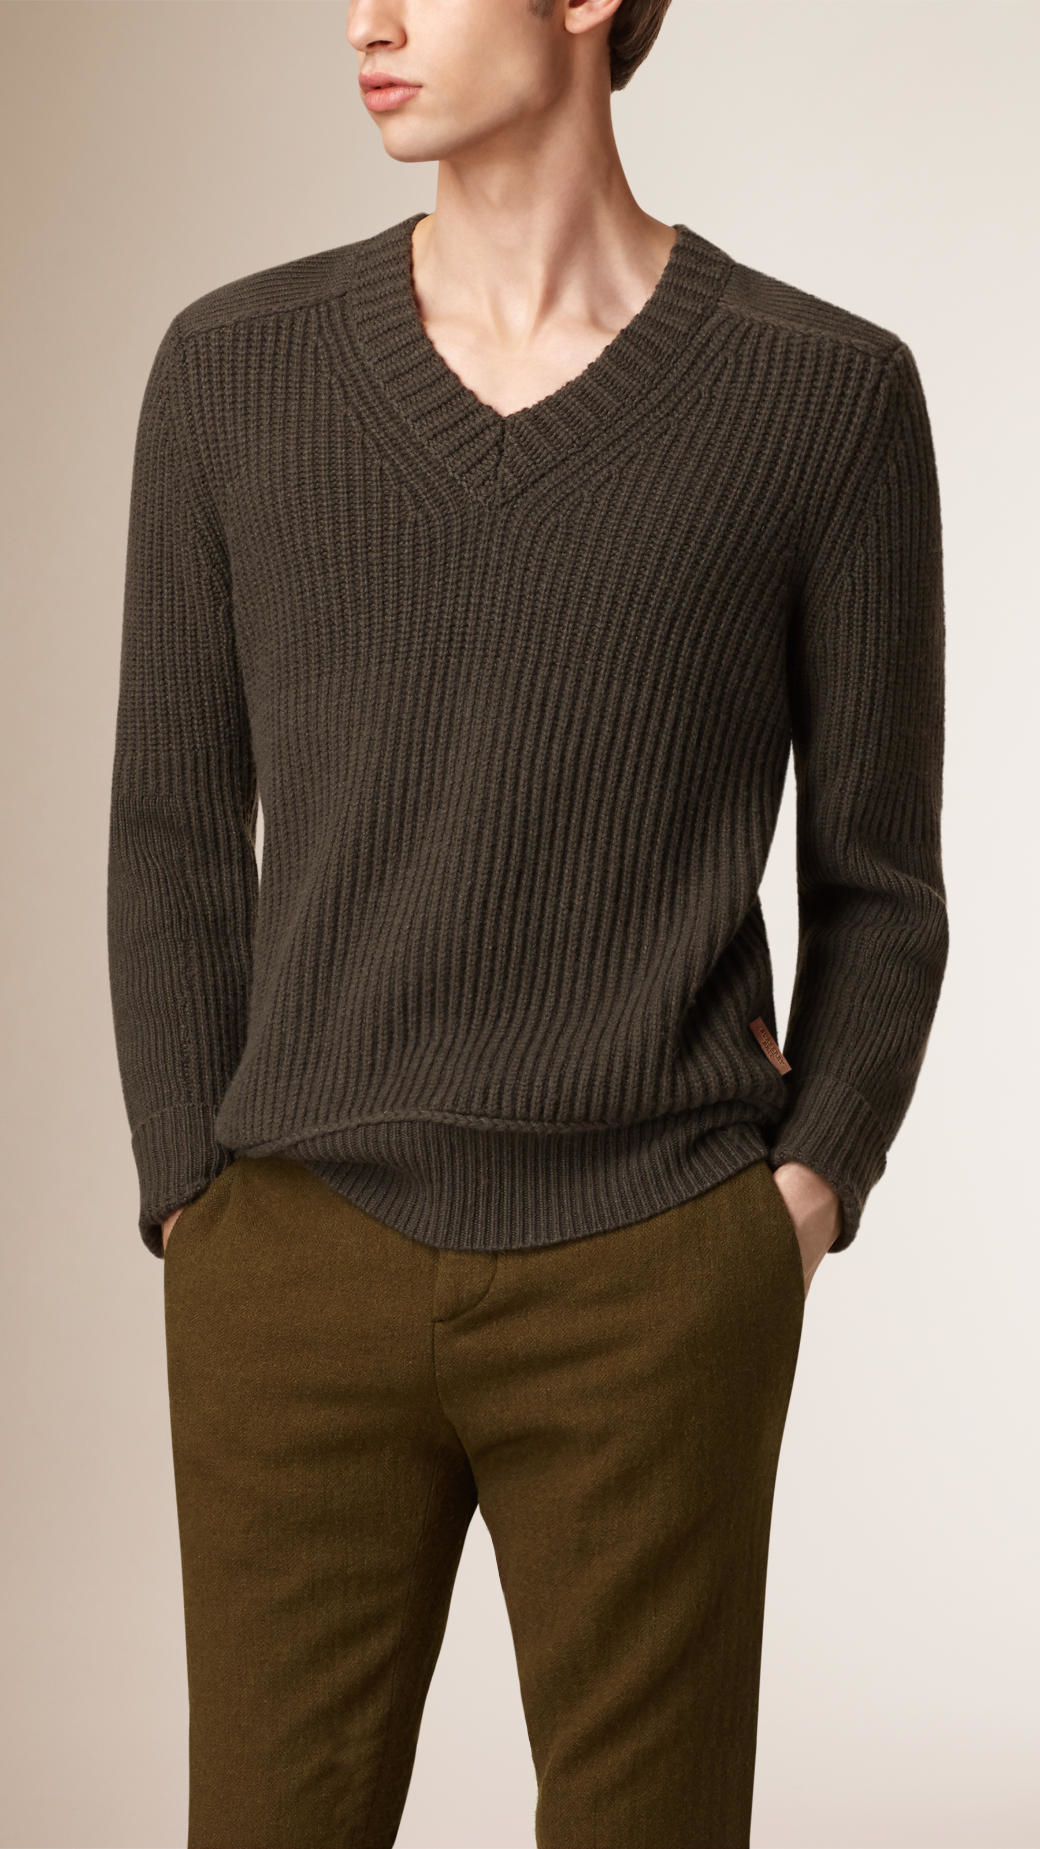 Lyst - Burberry V-neck Wool Cashmere Sweater in Green for Men